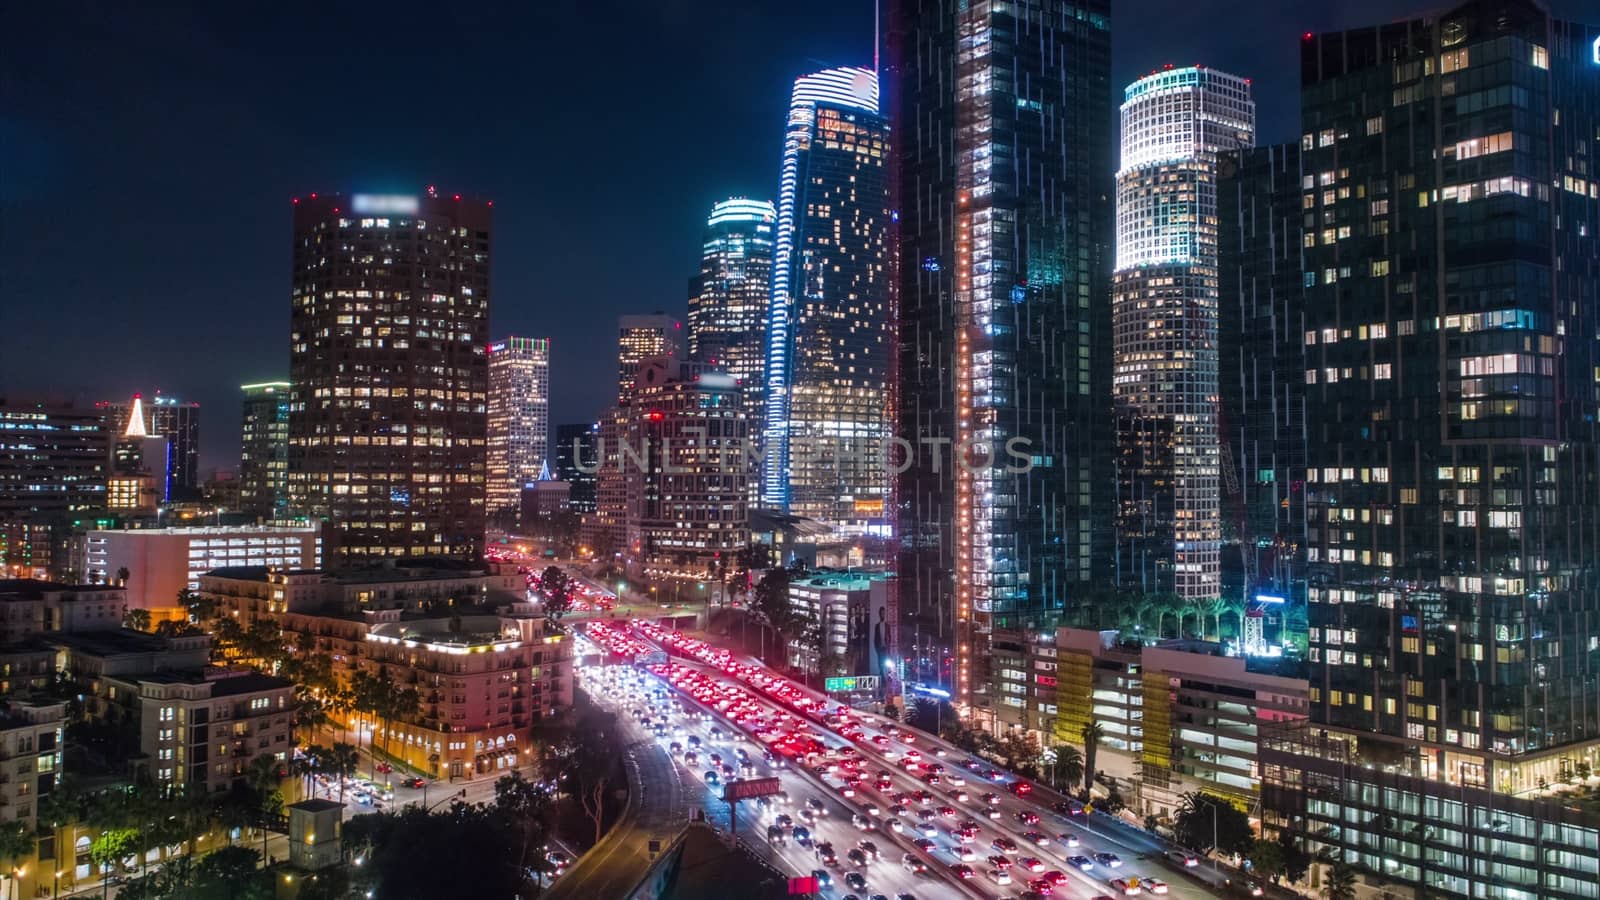 Cinematic aerial view of urban downtown Los Angeles city skyline and streets at night by bhavik_jagani